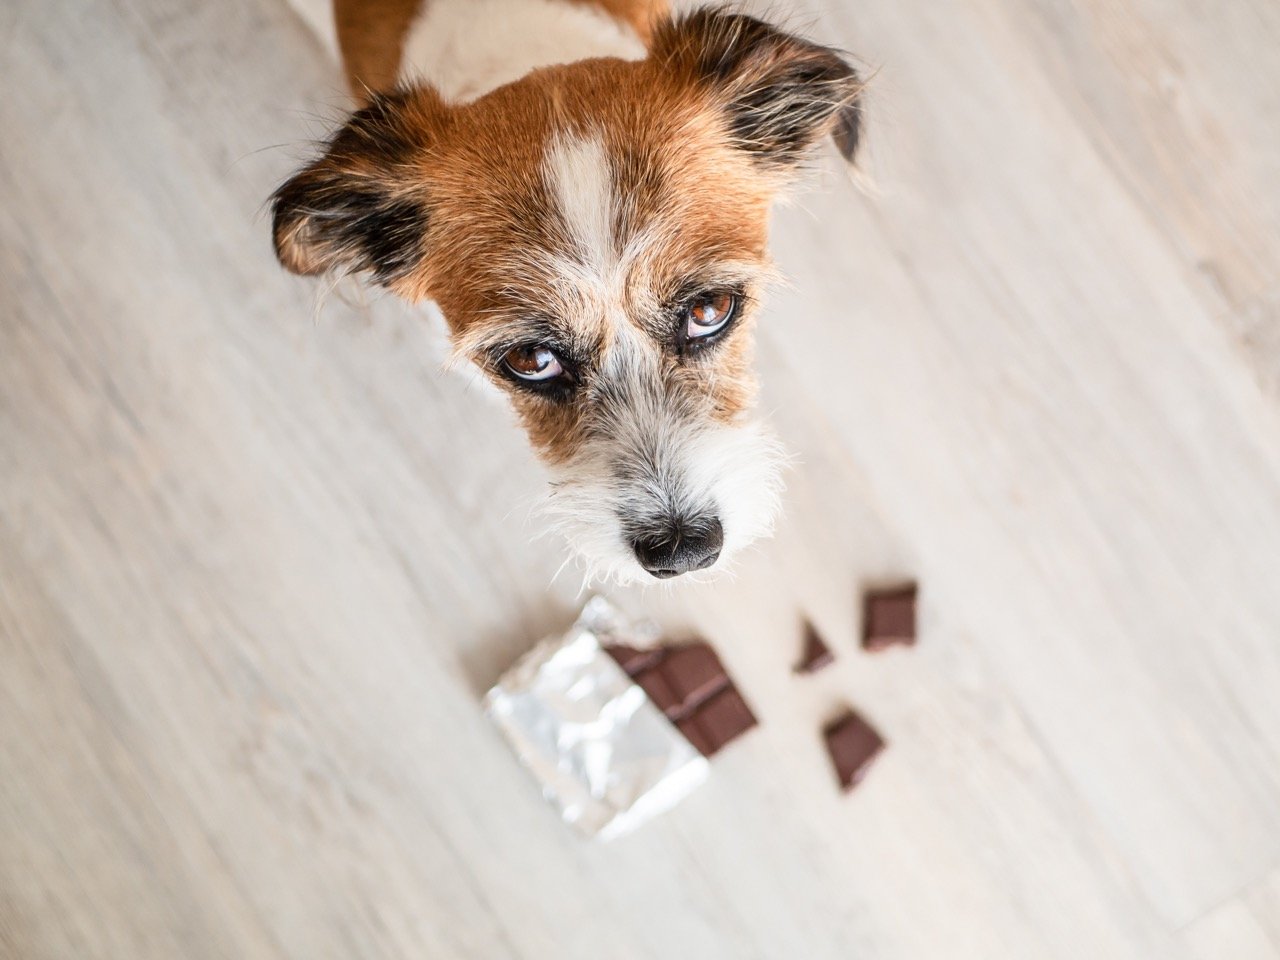 Help my dog ate chocolate: what to do next